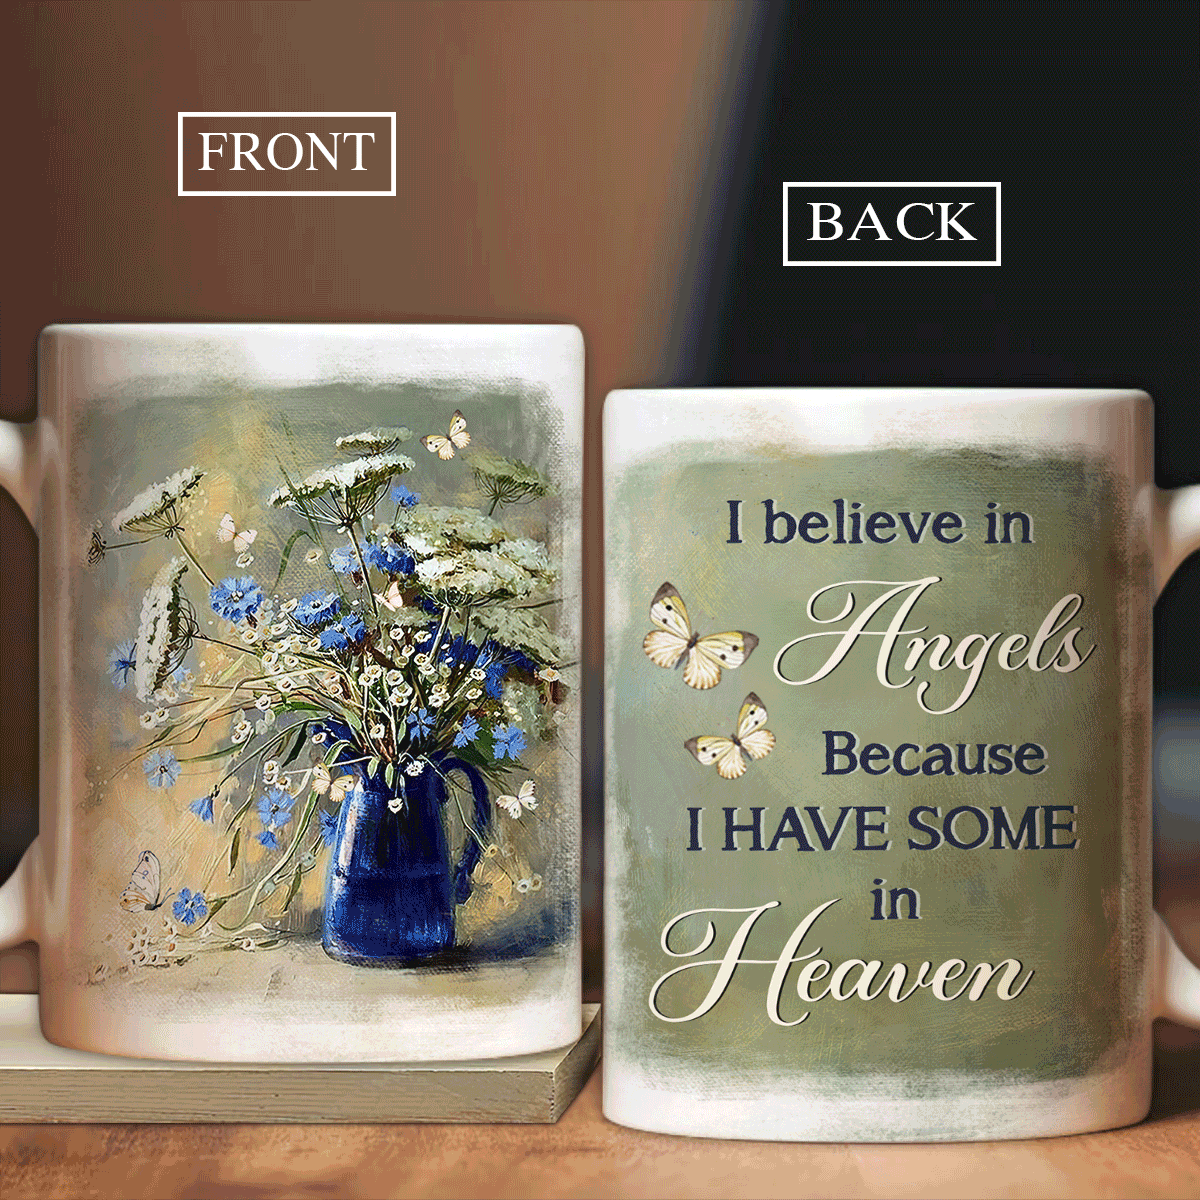 Memorial White Mug - Still life painting, Beautiful flower drawing, Yellow butterfly - Gift for members family - I believe in angels - Heaven White Mug.